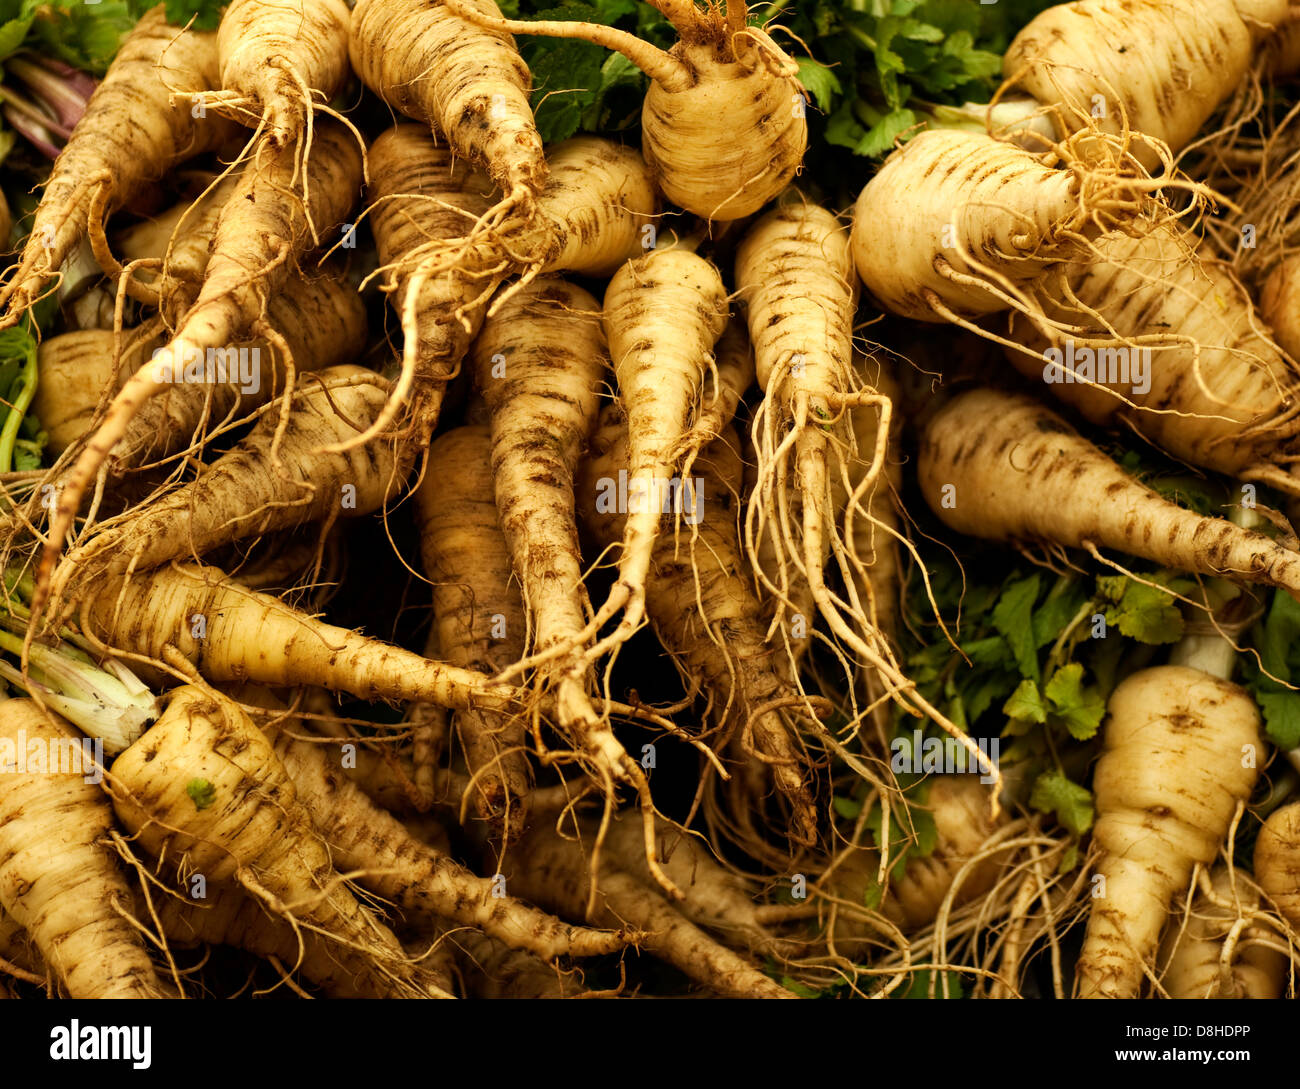 A heap of fresh parsnip Photo taken on: May 15th, 2010 Stock Photo